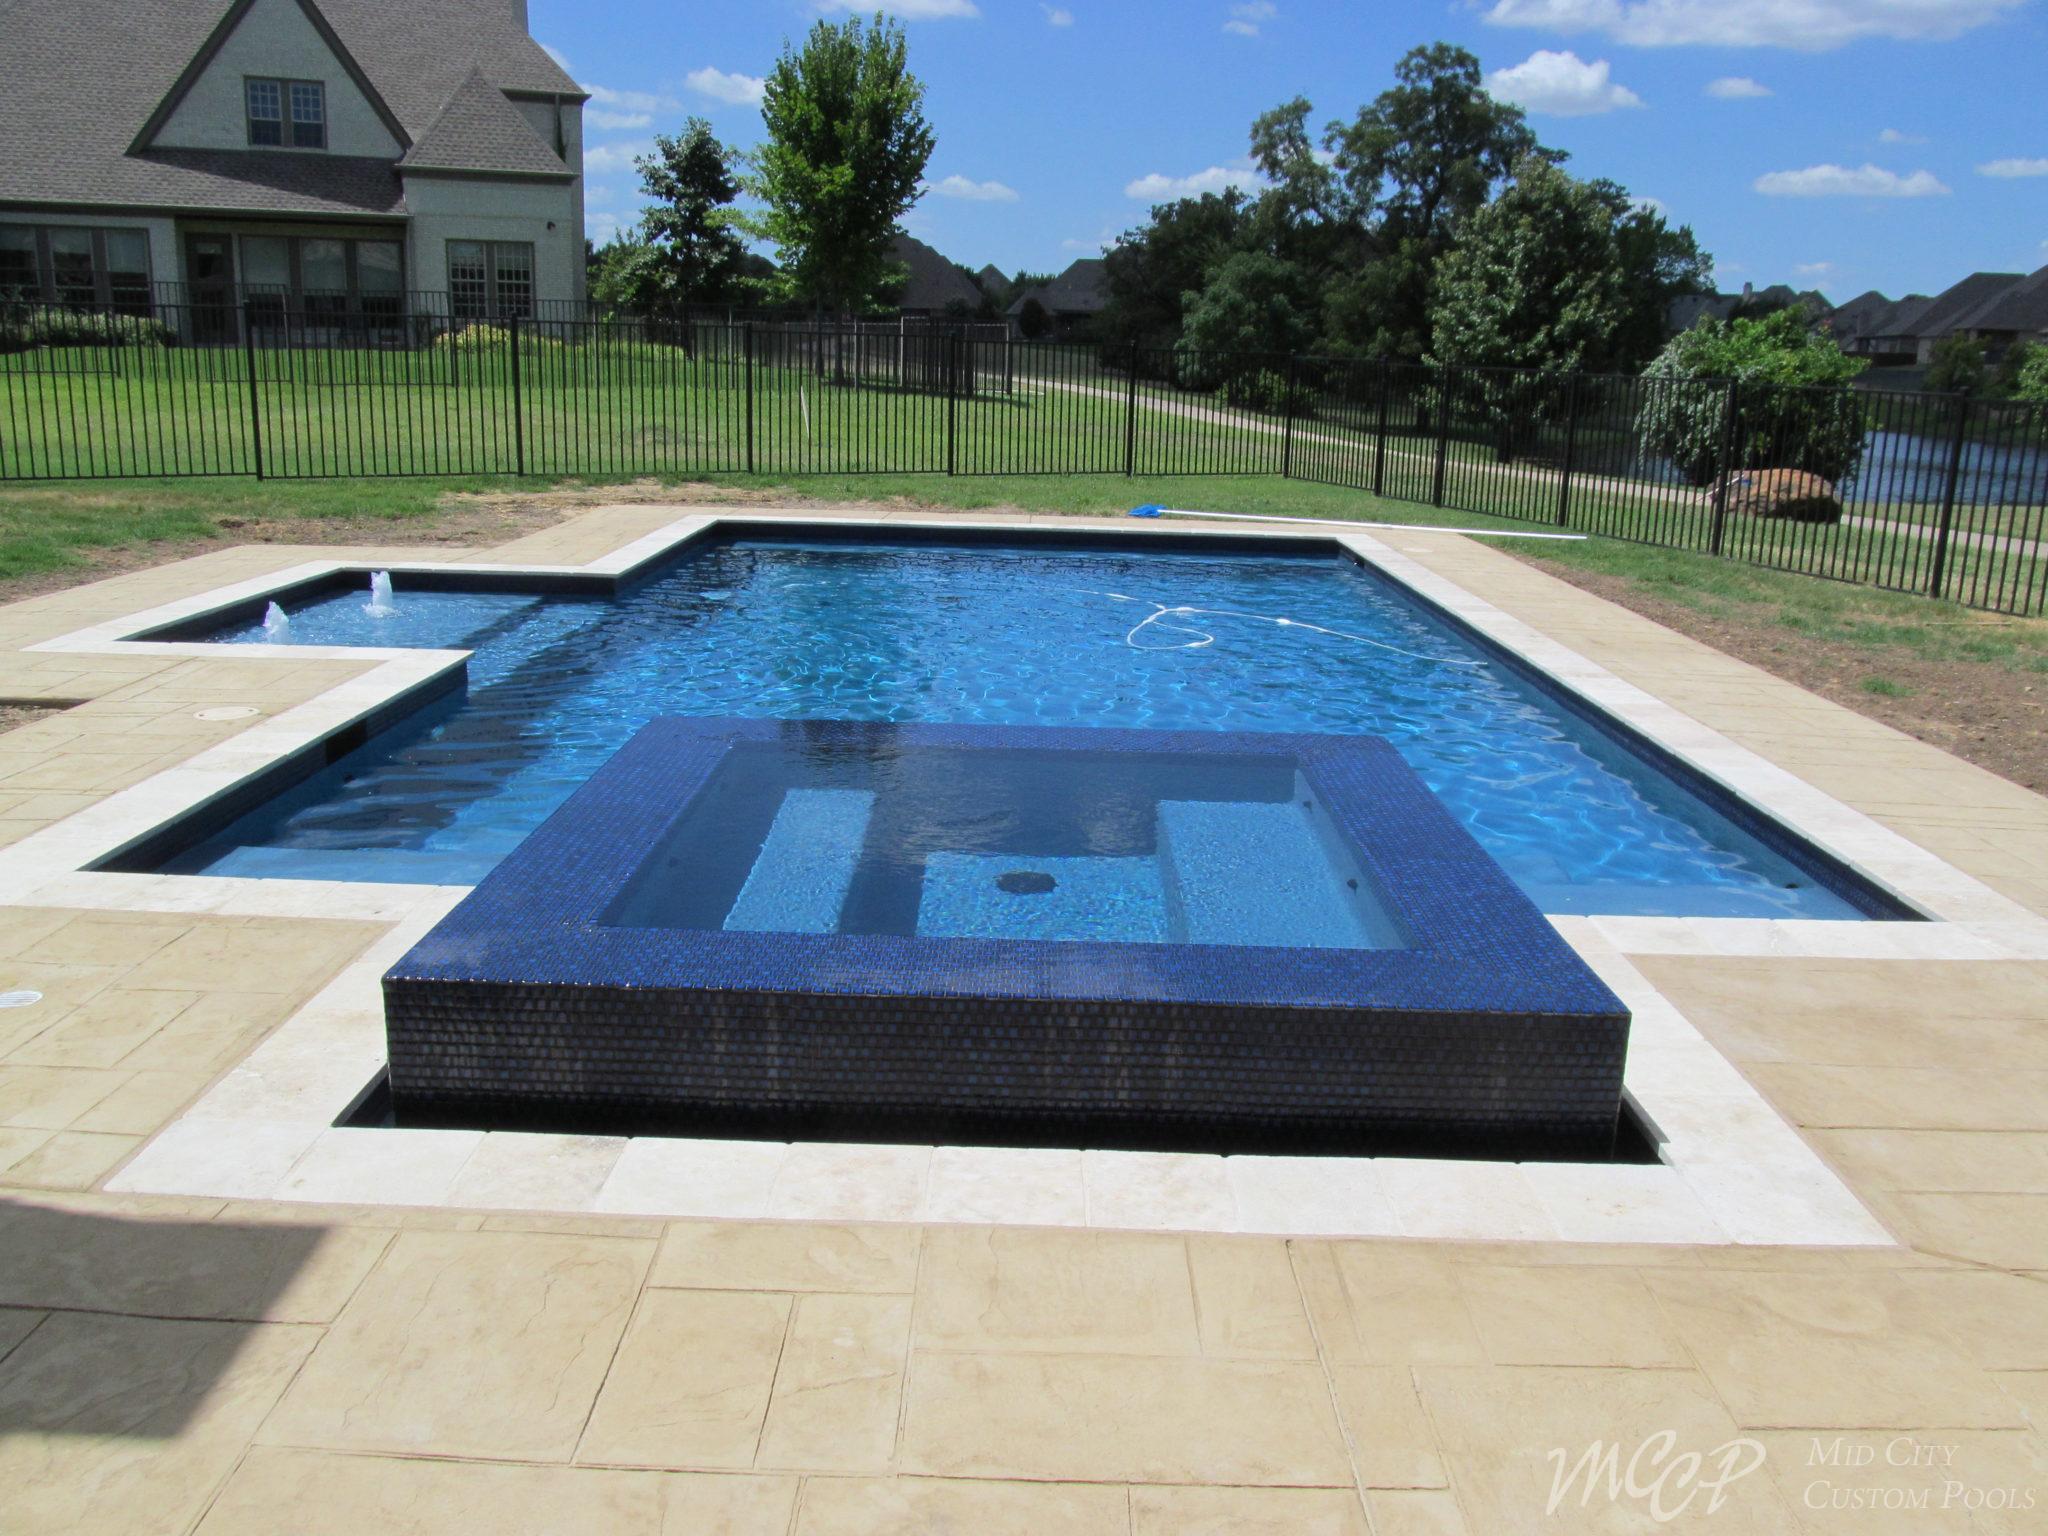 What are the most common pool construction mistakes people make when building their own pool?